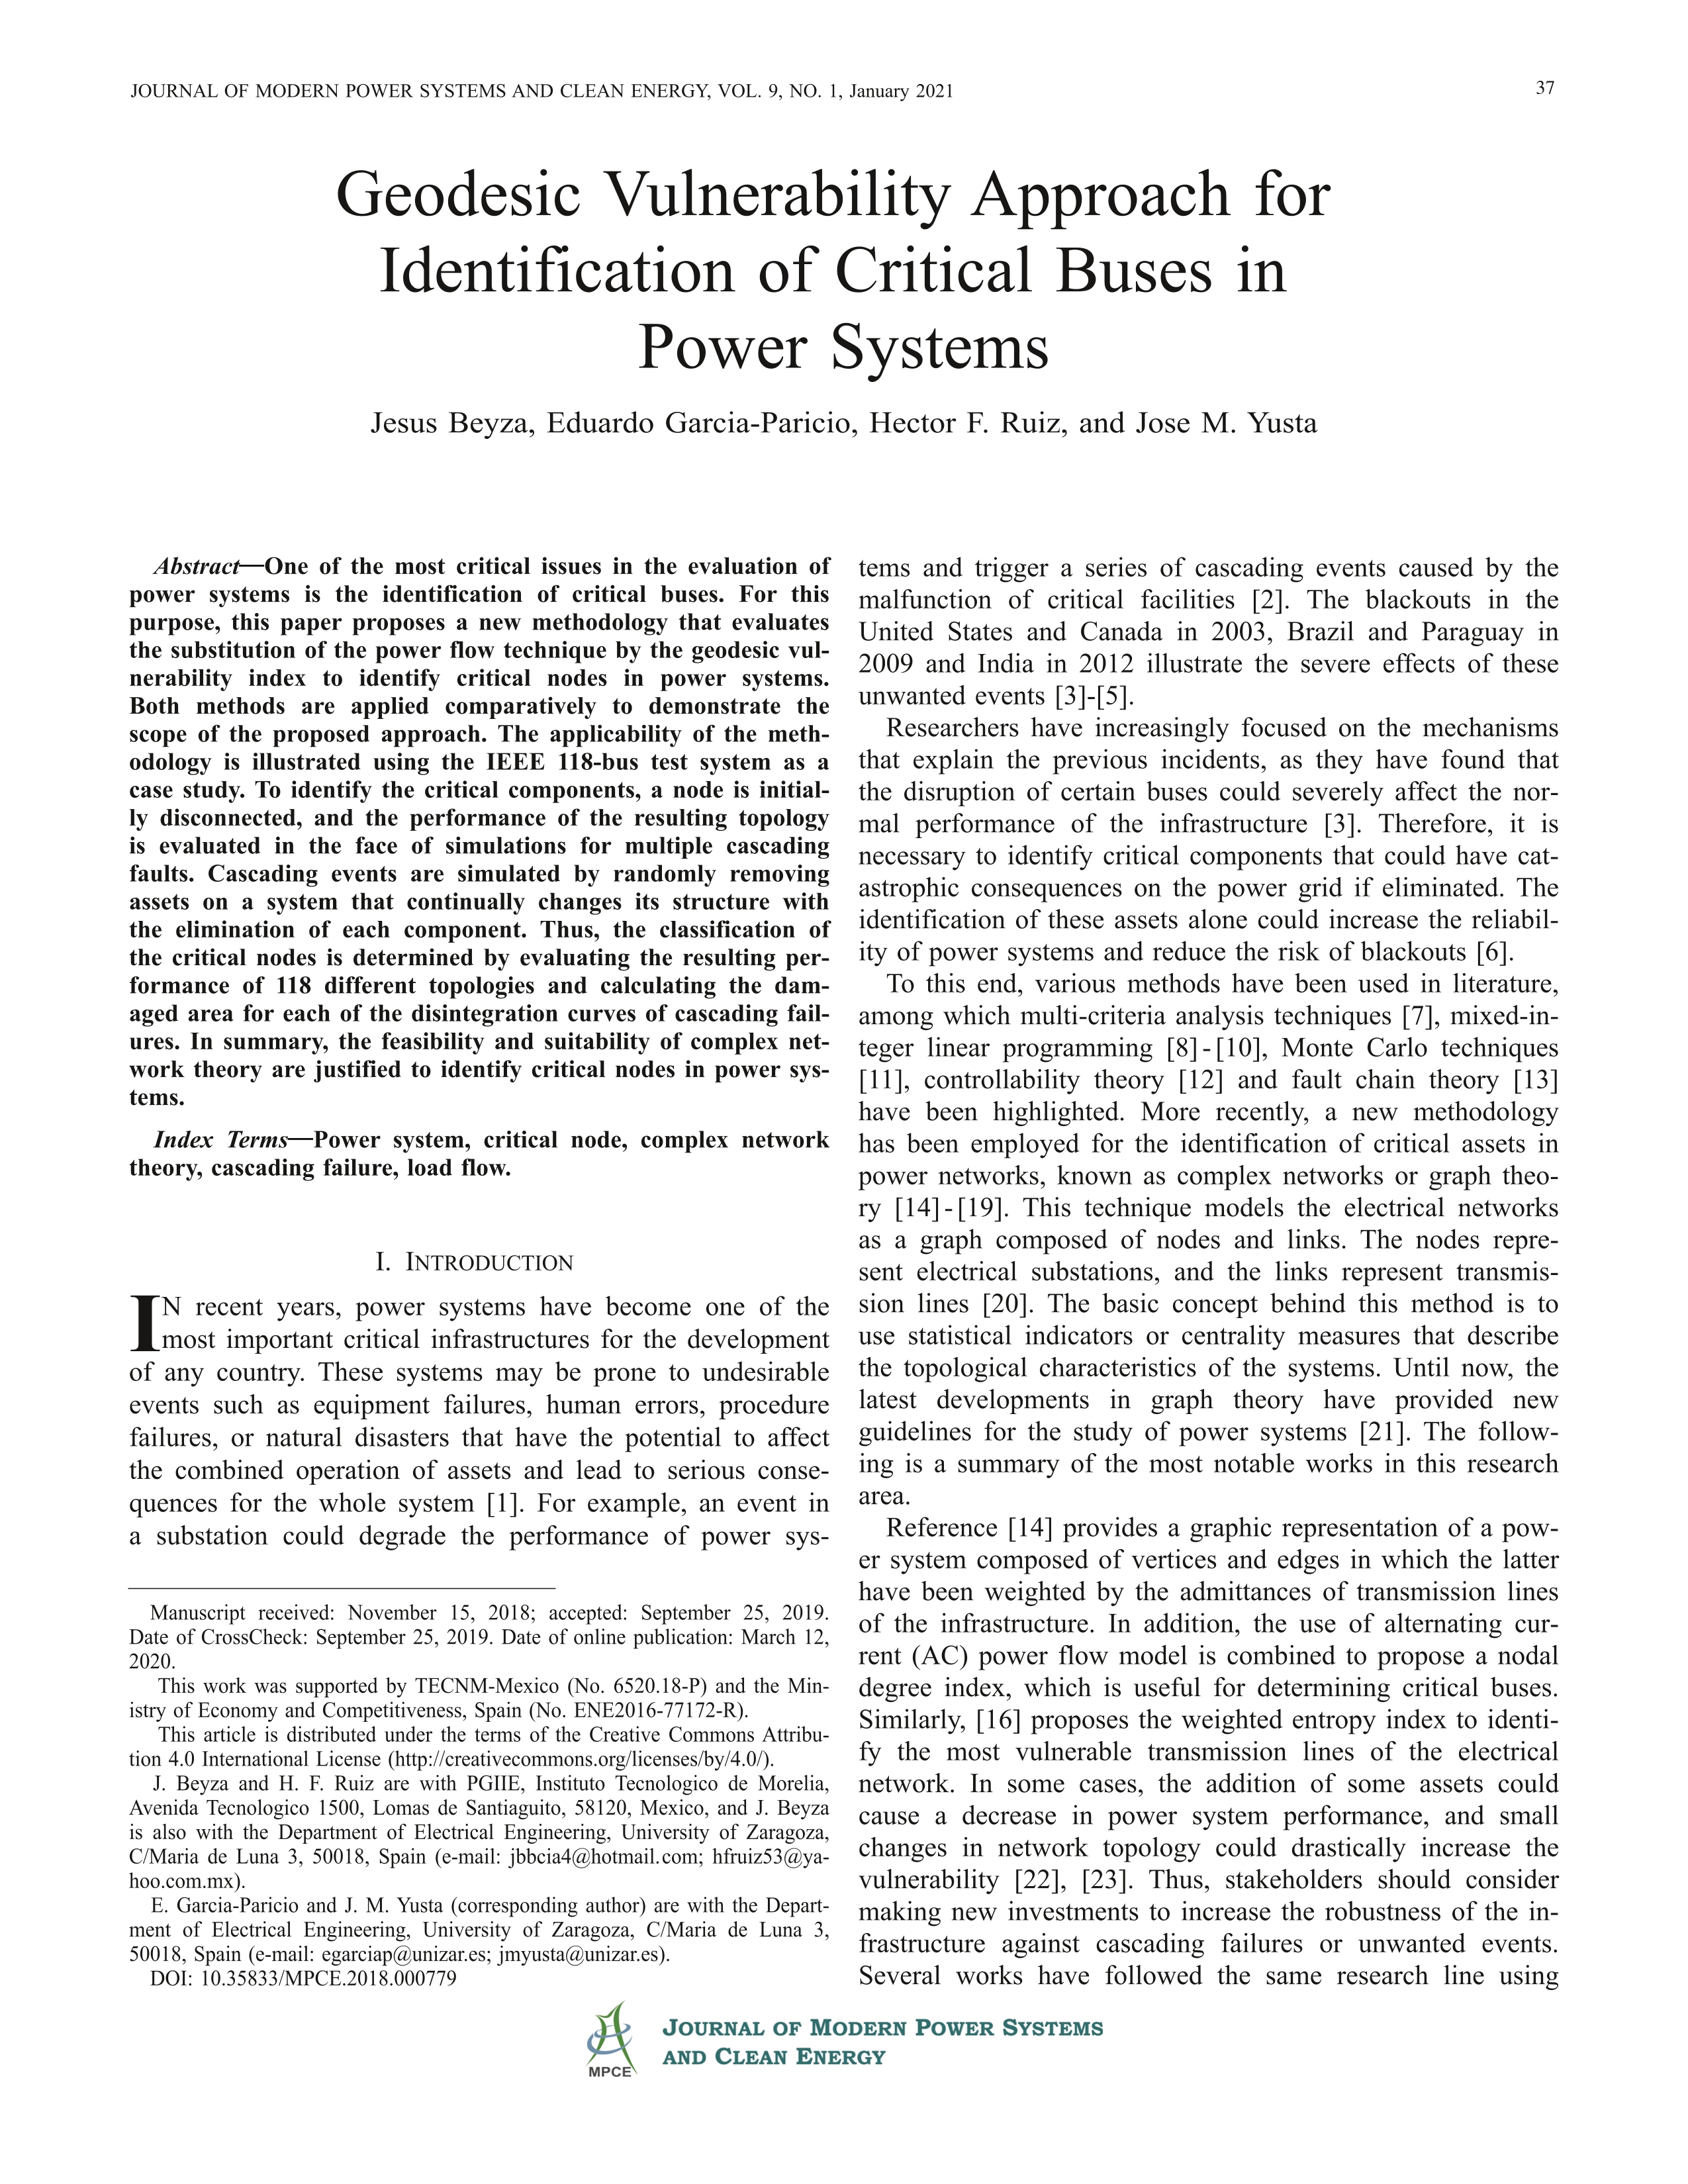 Geodesic vulnerability approach for identification of critical buses in power systems